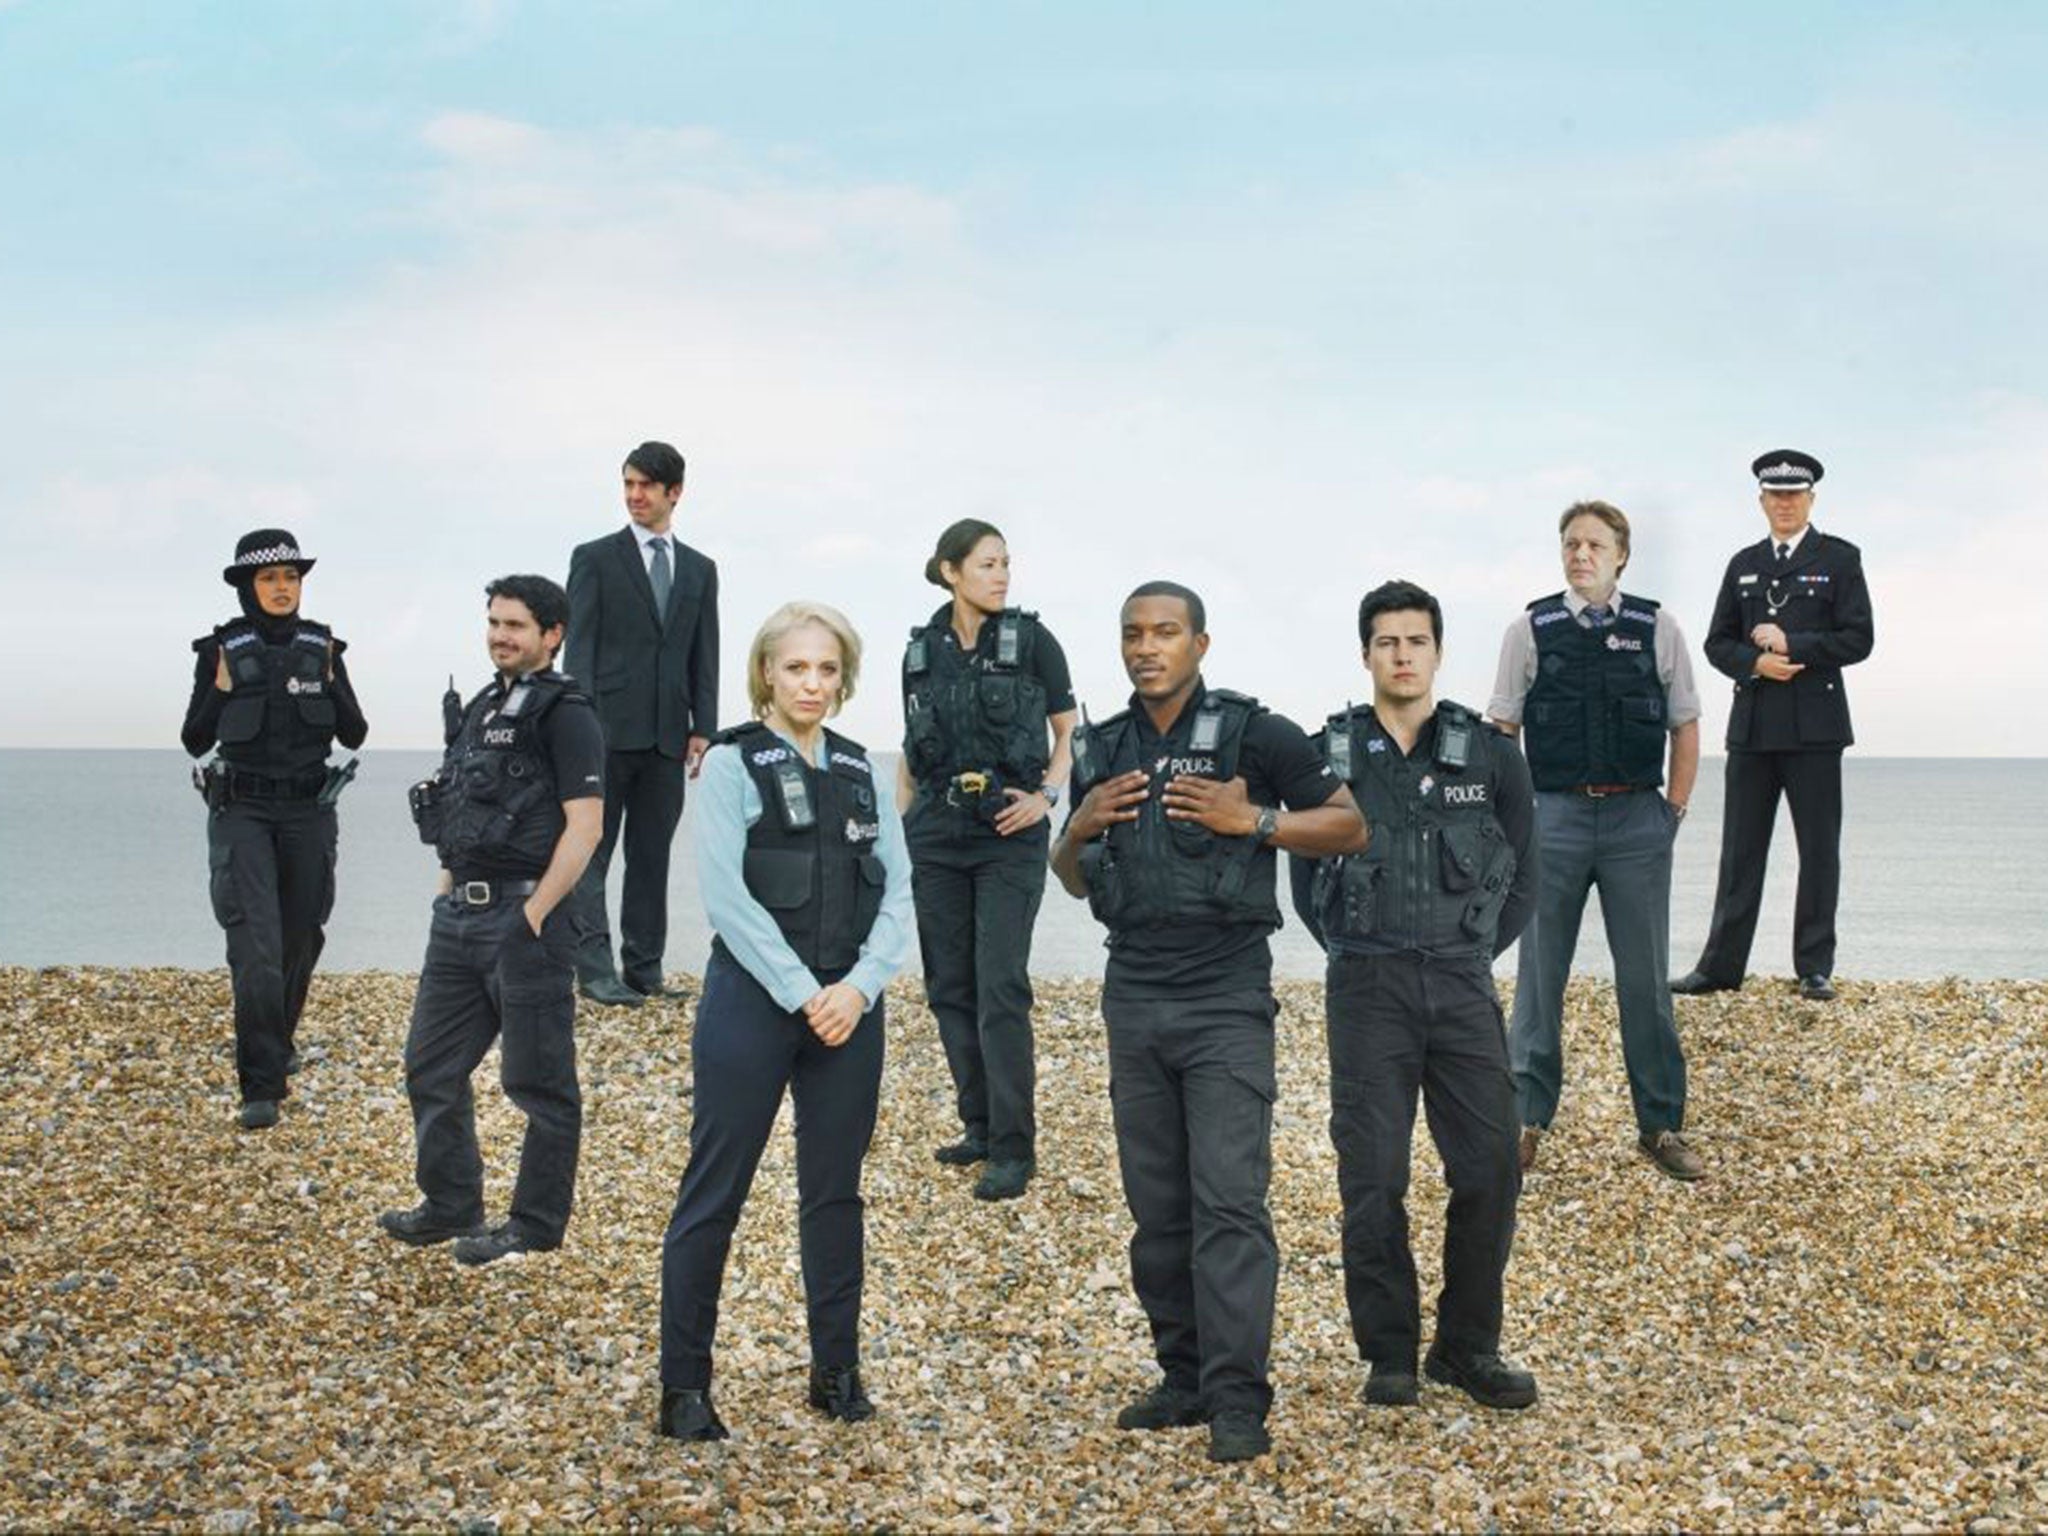 Upping the ante for depicting modern policing: The cast of Cuffs (BBC)